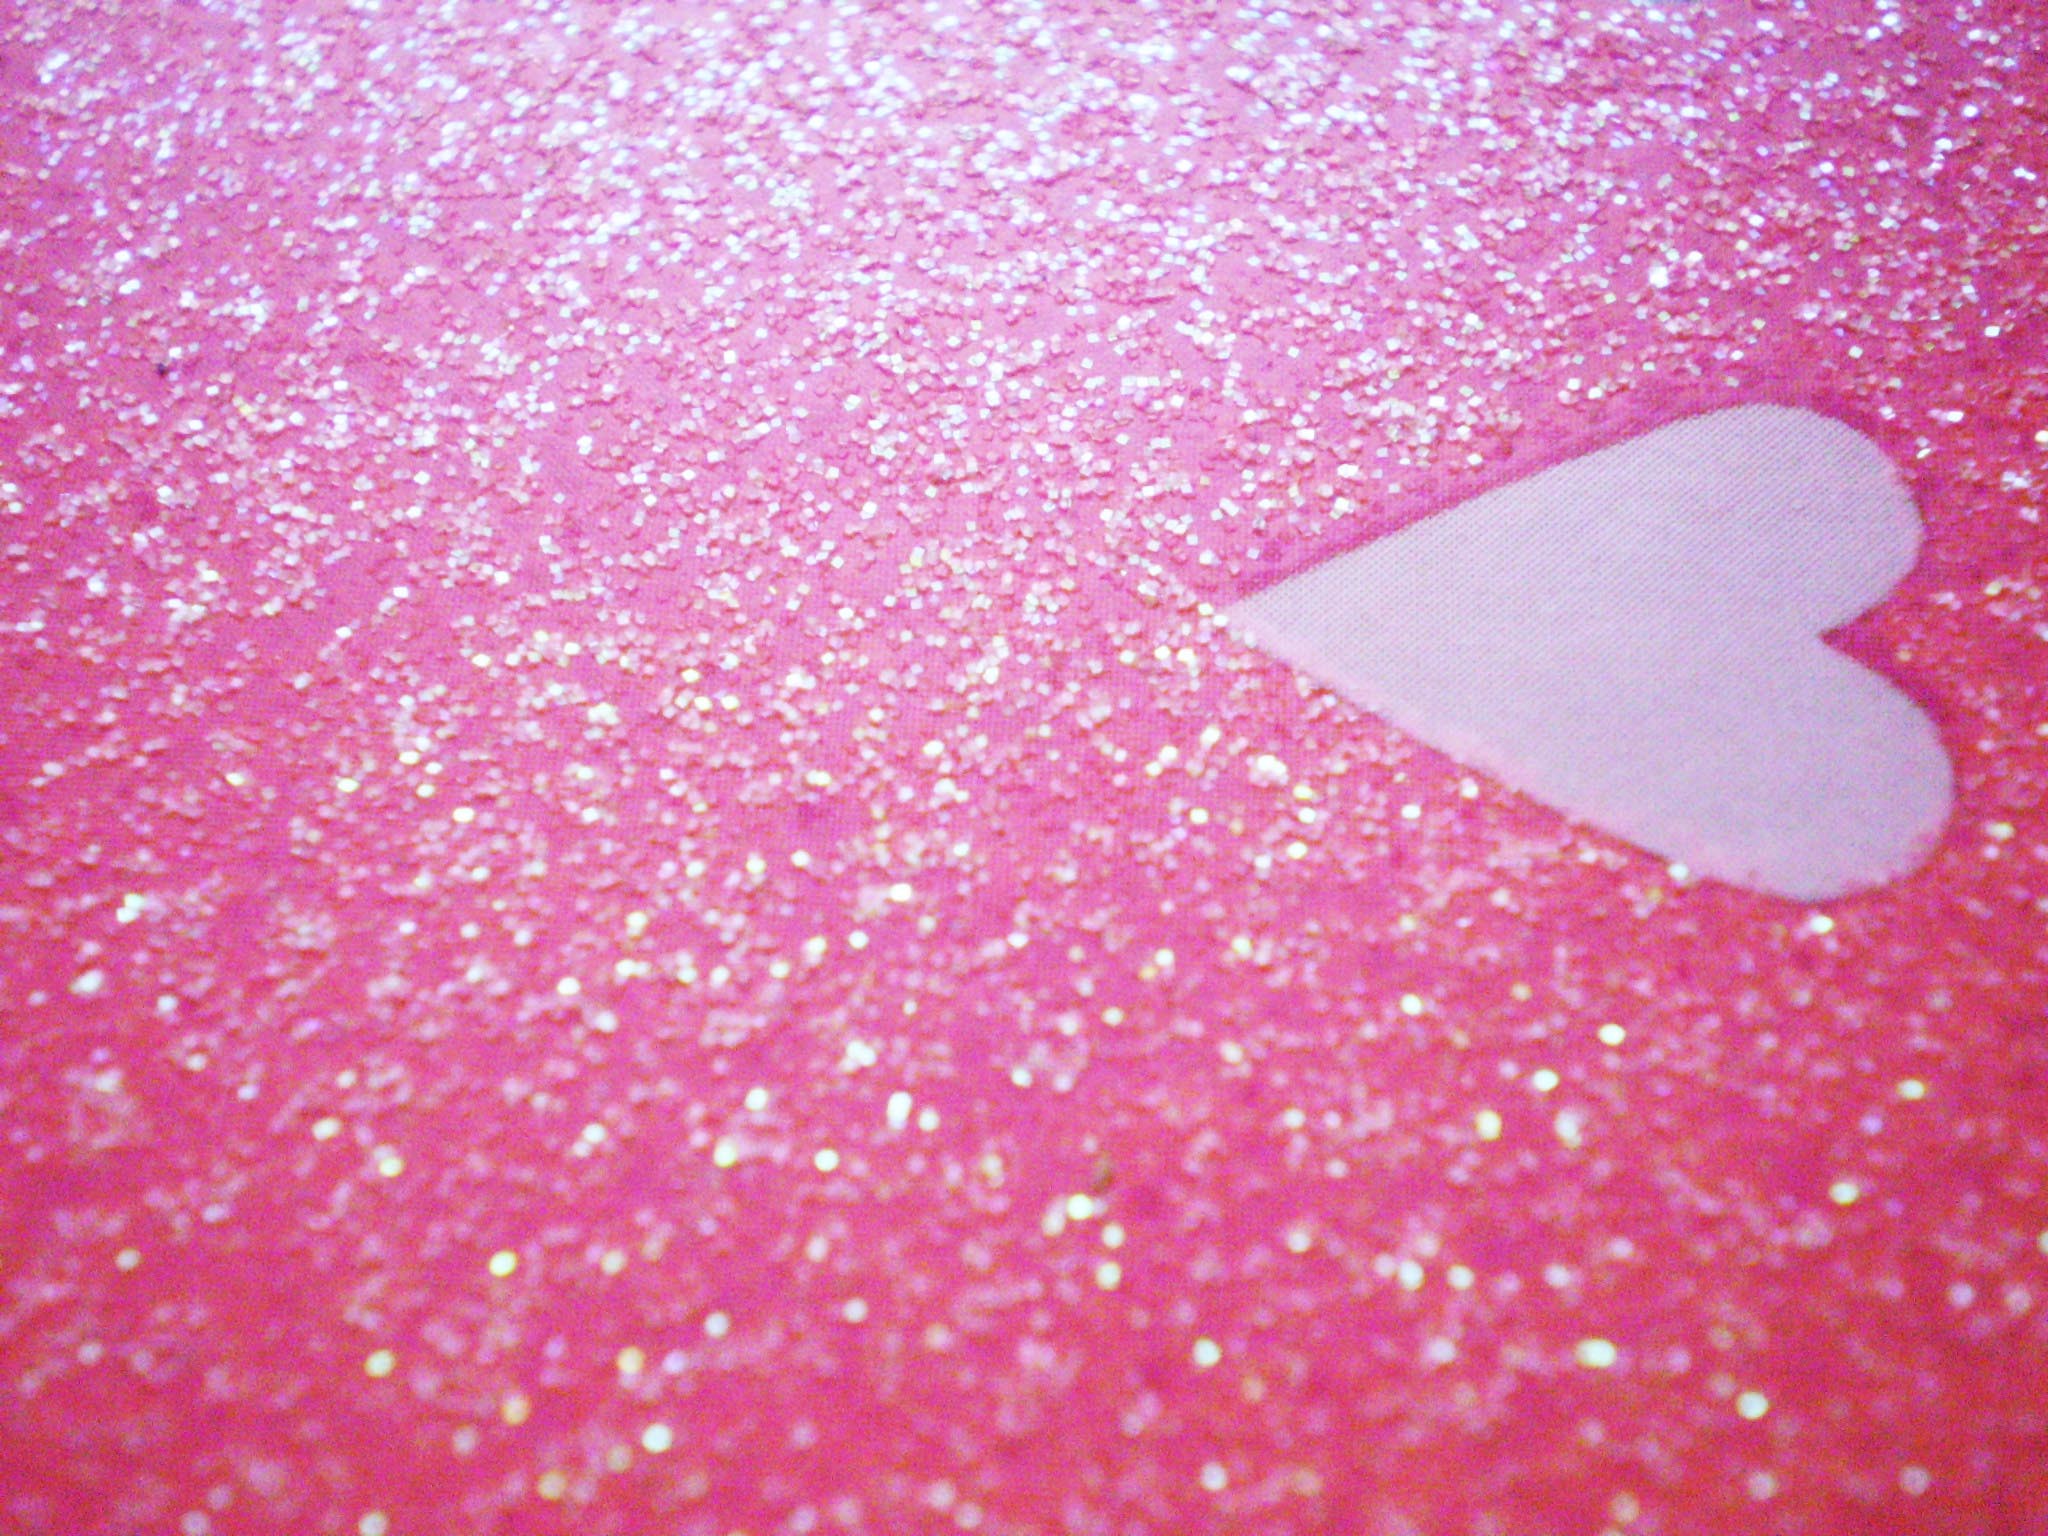 Pink heart with glitter background for valentines day  CanStock